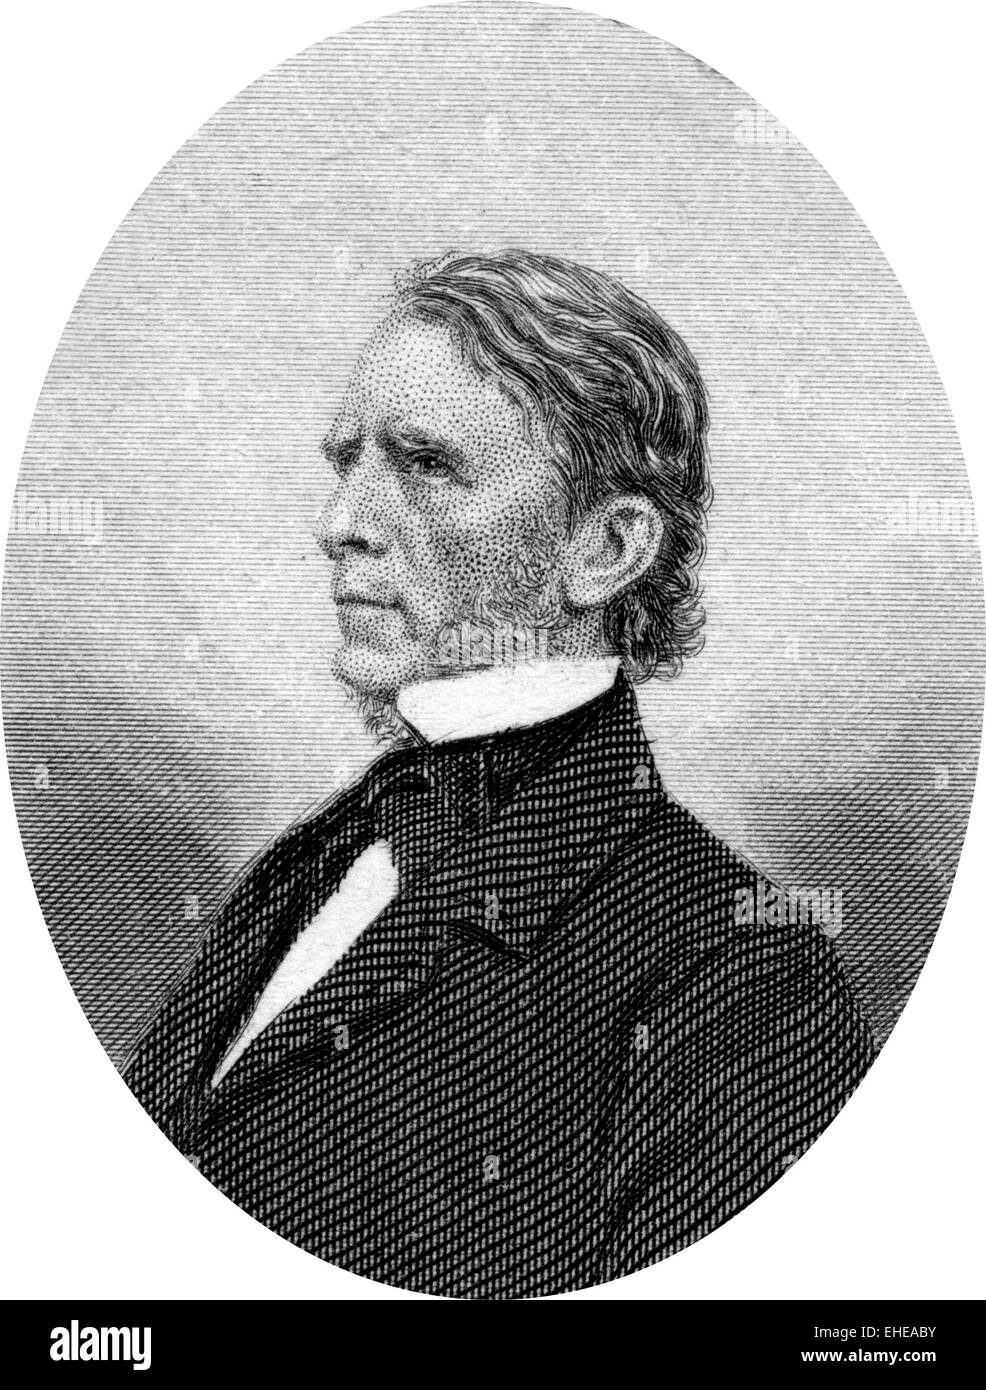 Engraving of William Pitt Fessenden (October 16, 1806 – September 8, 1869), an American politician from the U.S. state of Maine. Stock Photo